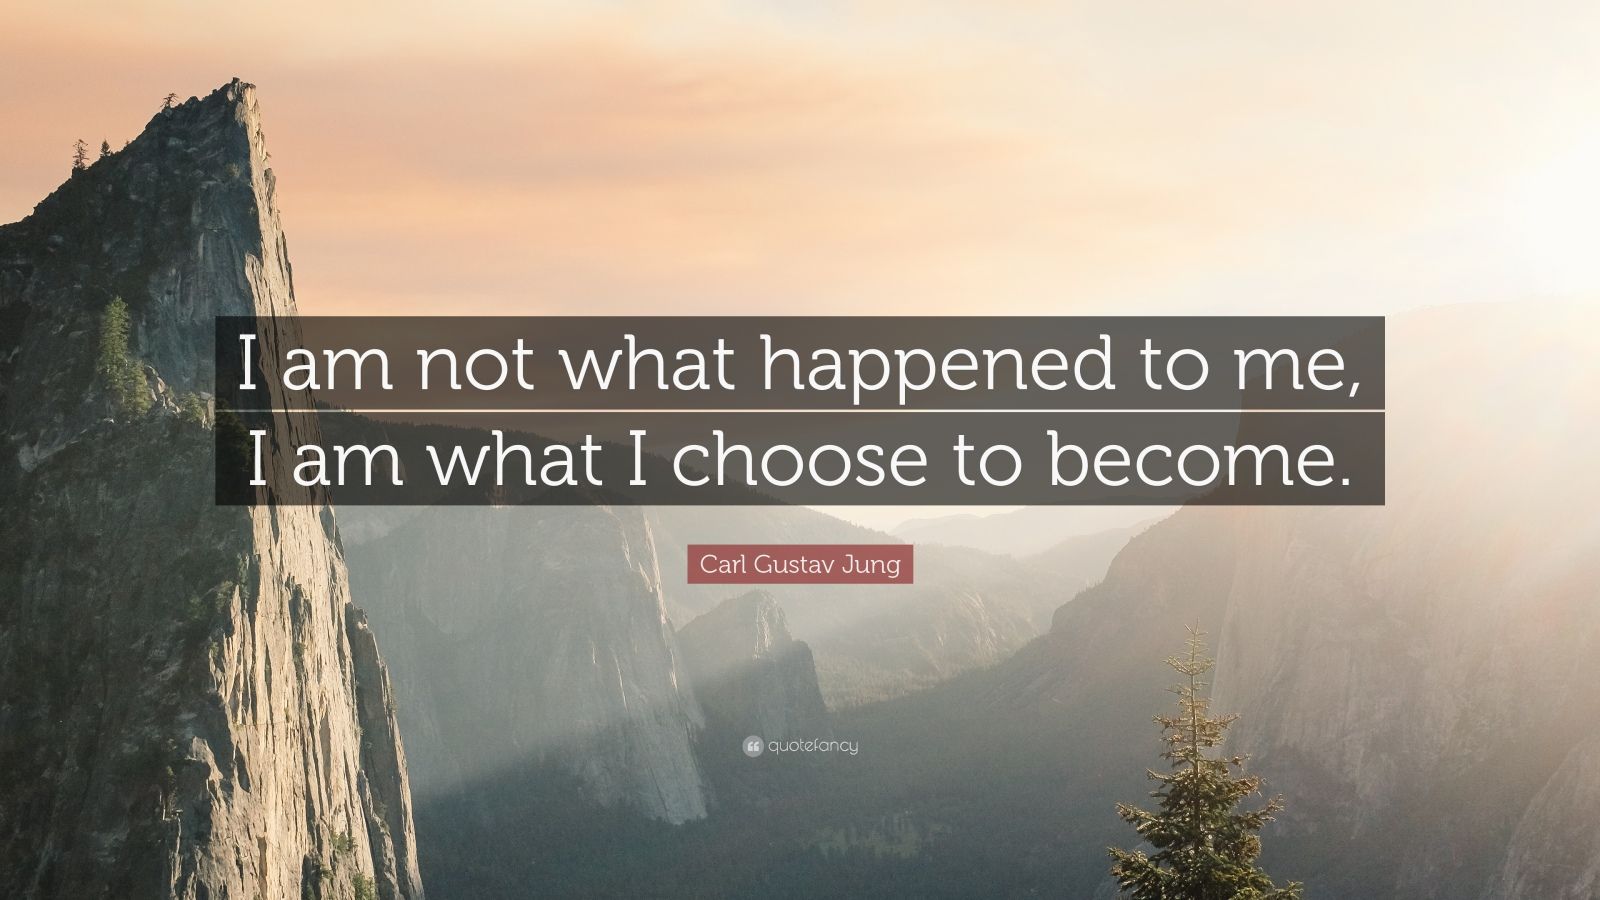 19171 Carl Gustav Jung Quote I am not what happened to me I am what I